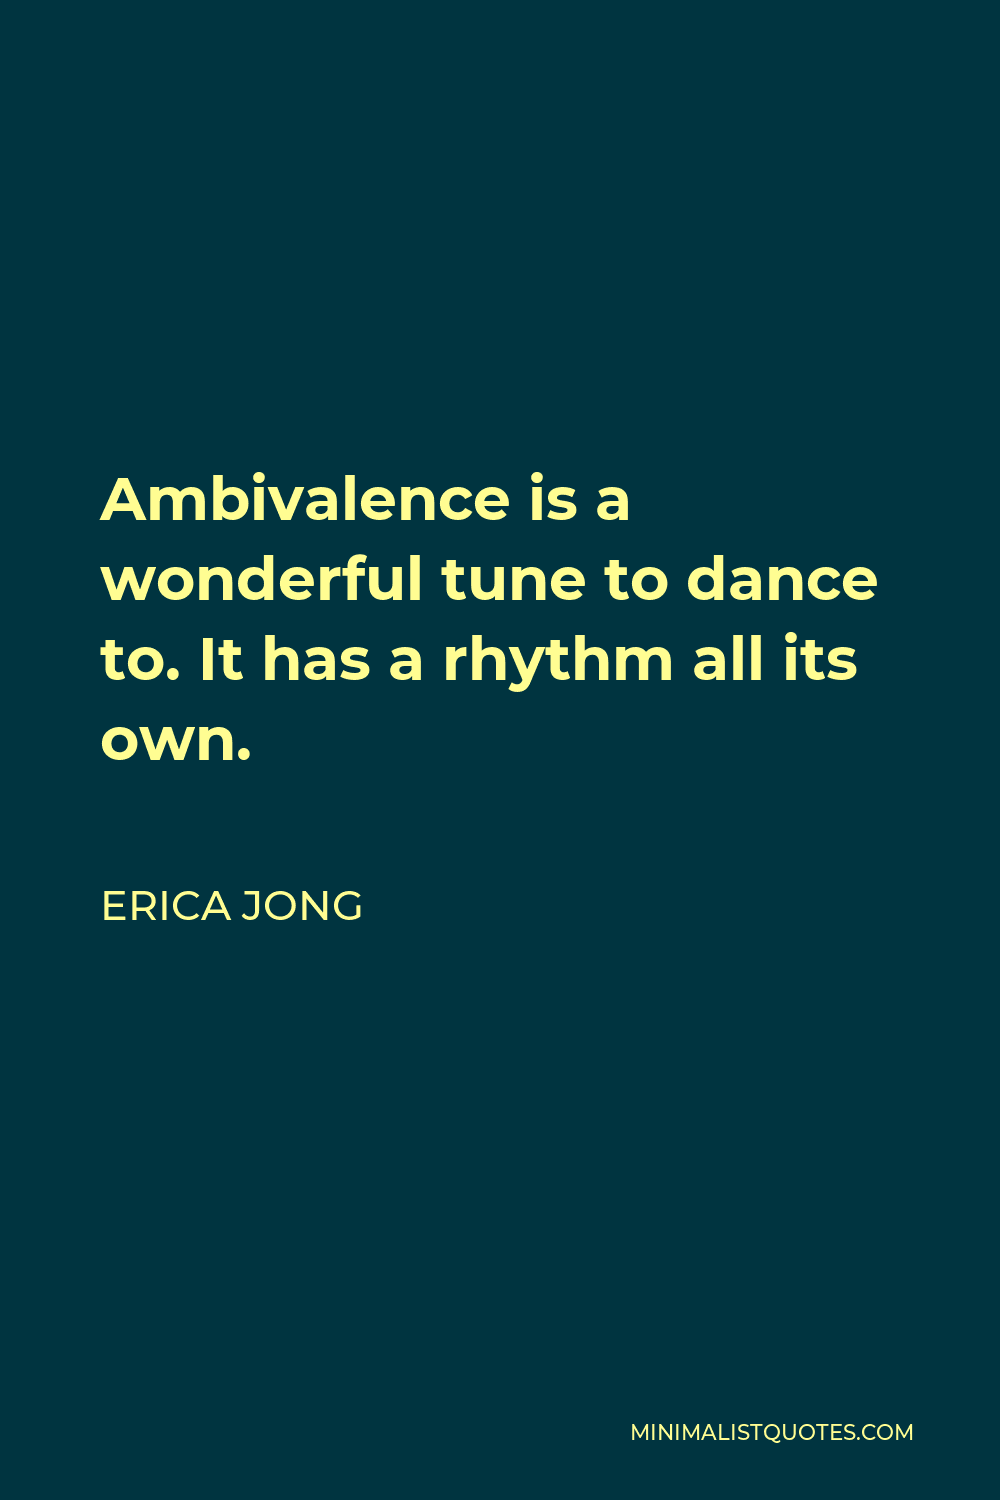 Erica Jong Quote - Ambivalence is a wonderful tune to dance to. It has a rhythm all its own.